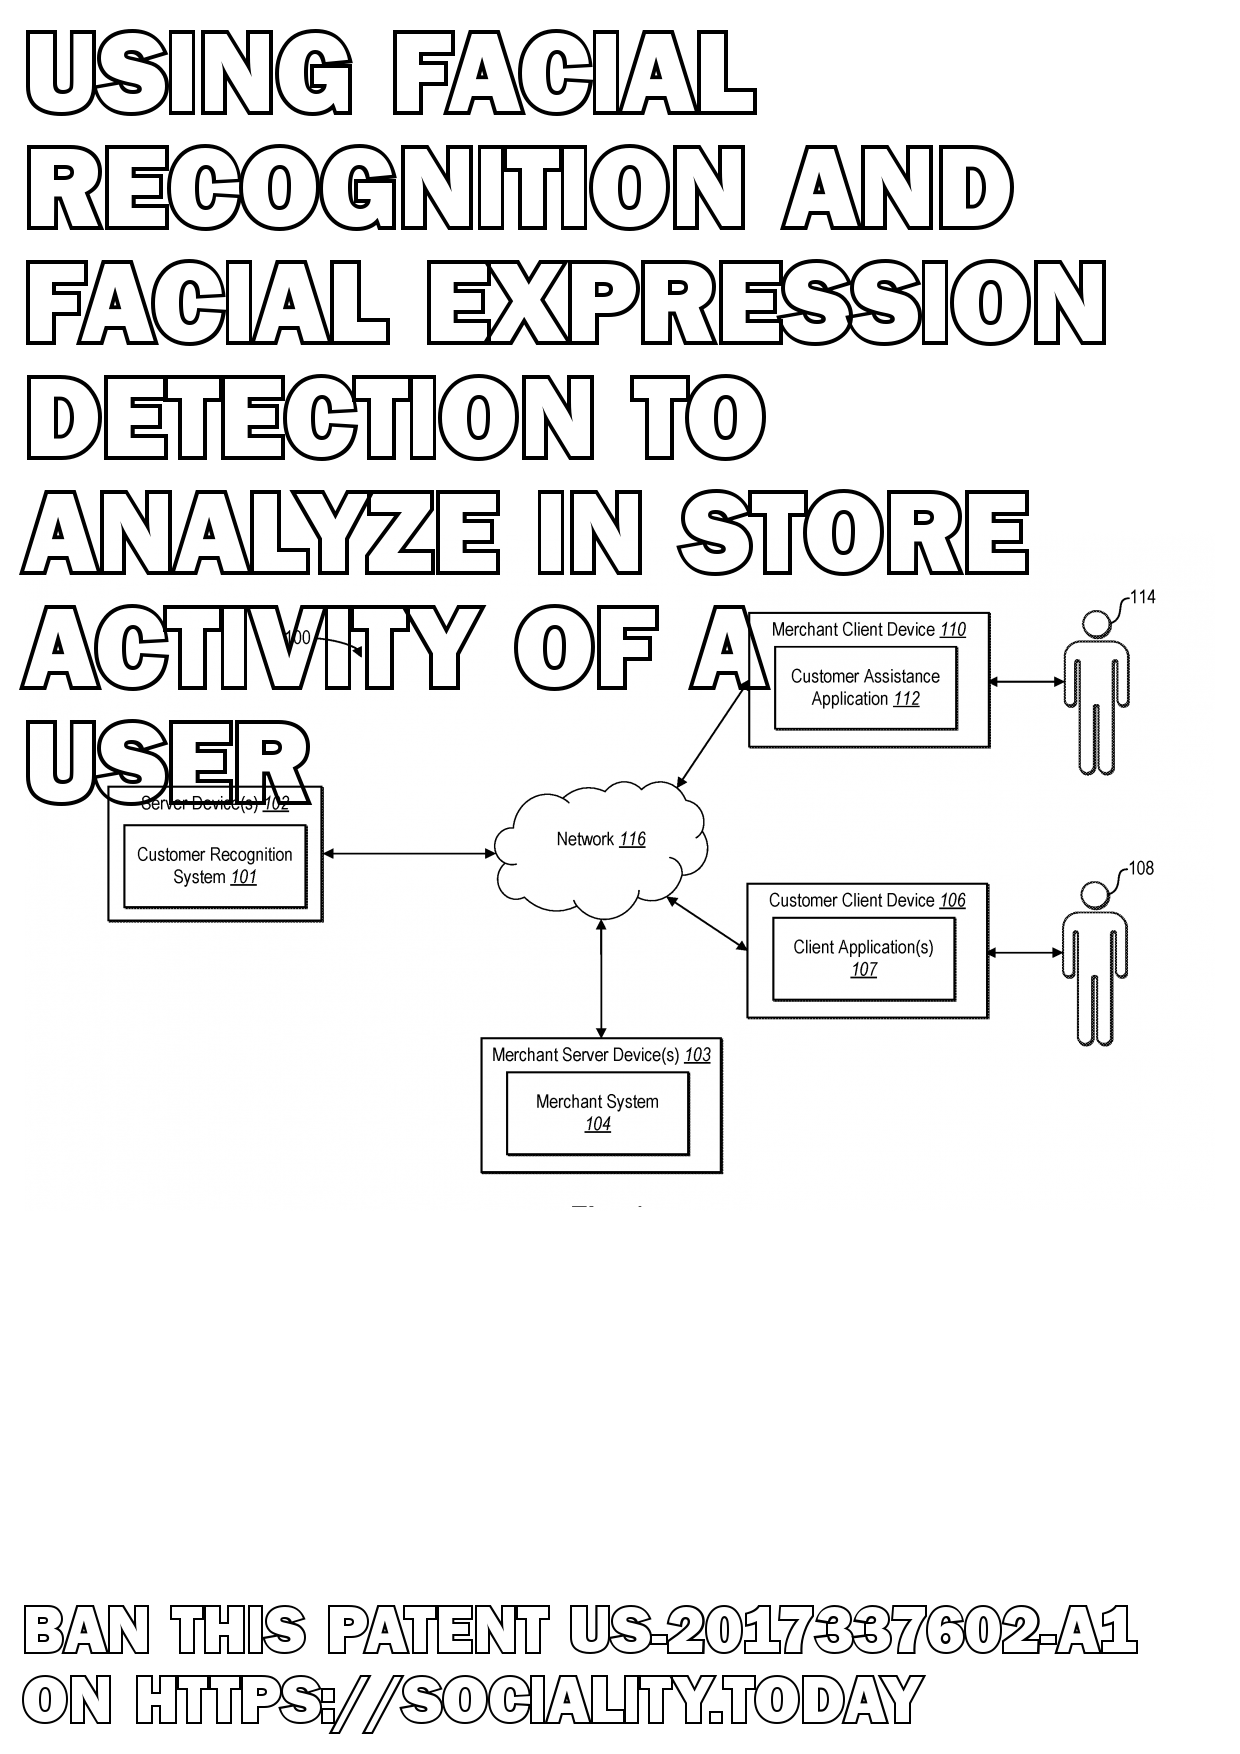 Using facial recognition and facial expression detection to analyze in-store activity of a user  - US-2017337602-A1